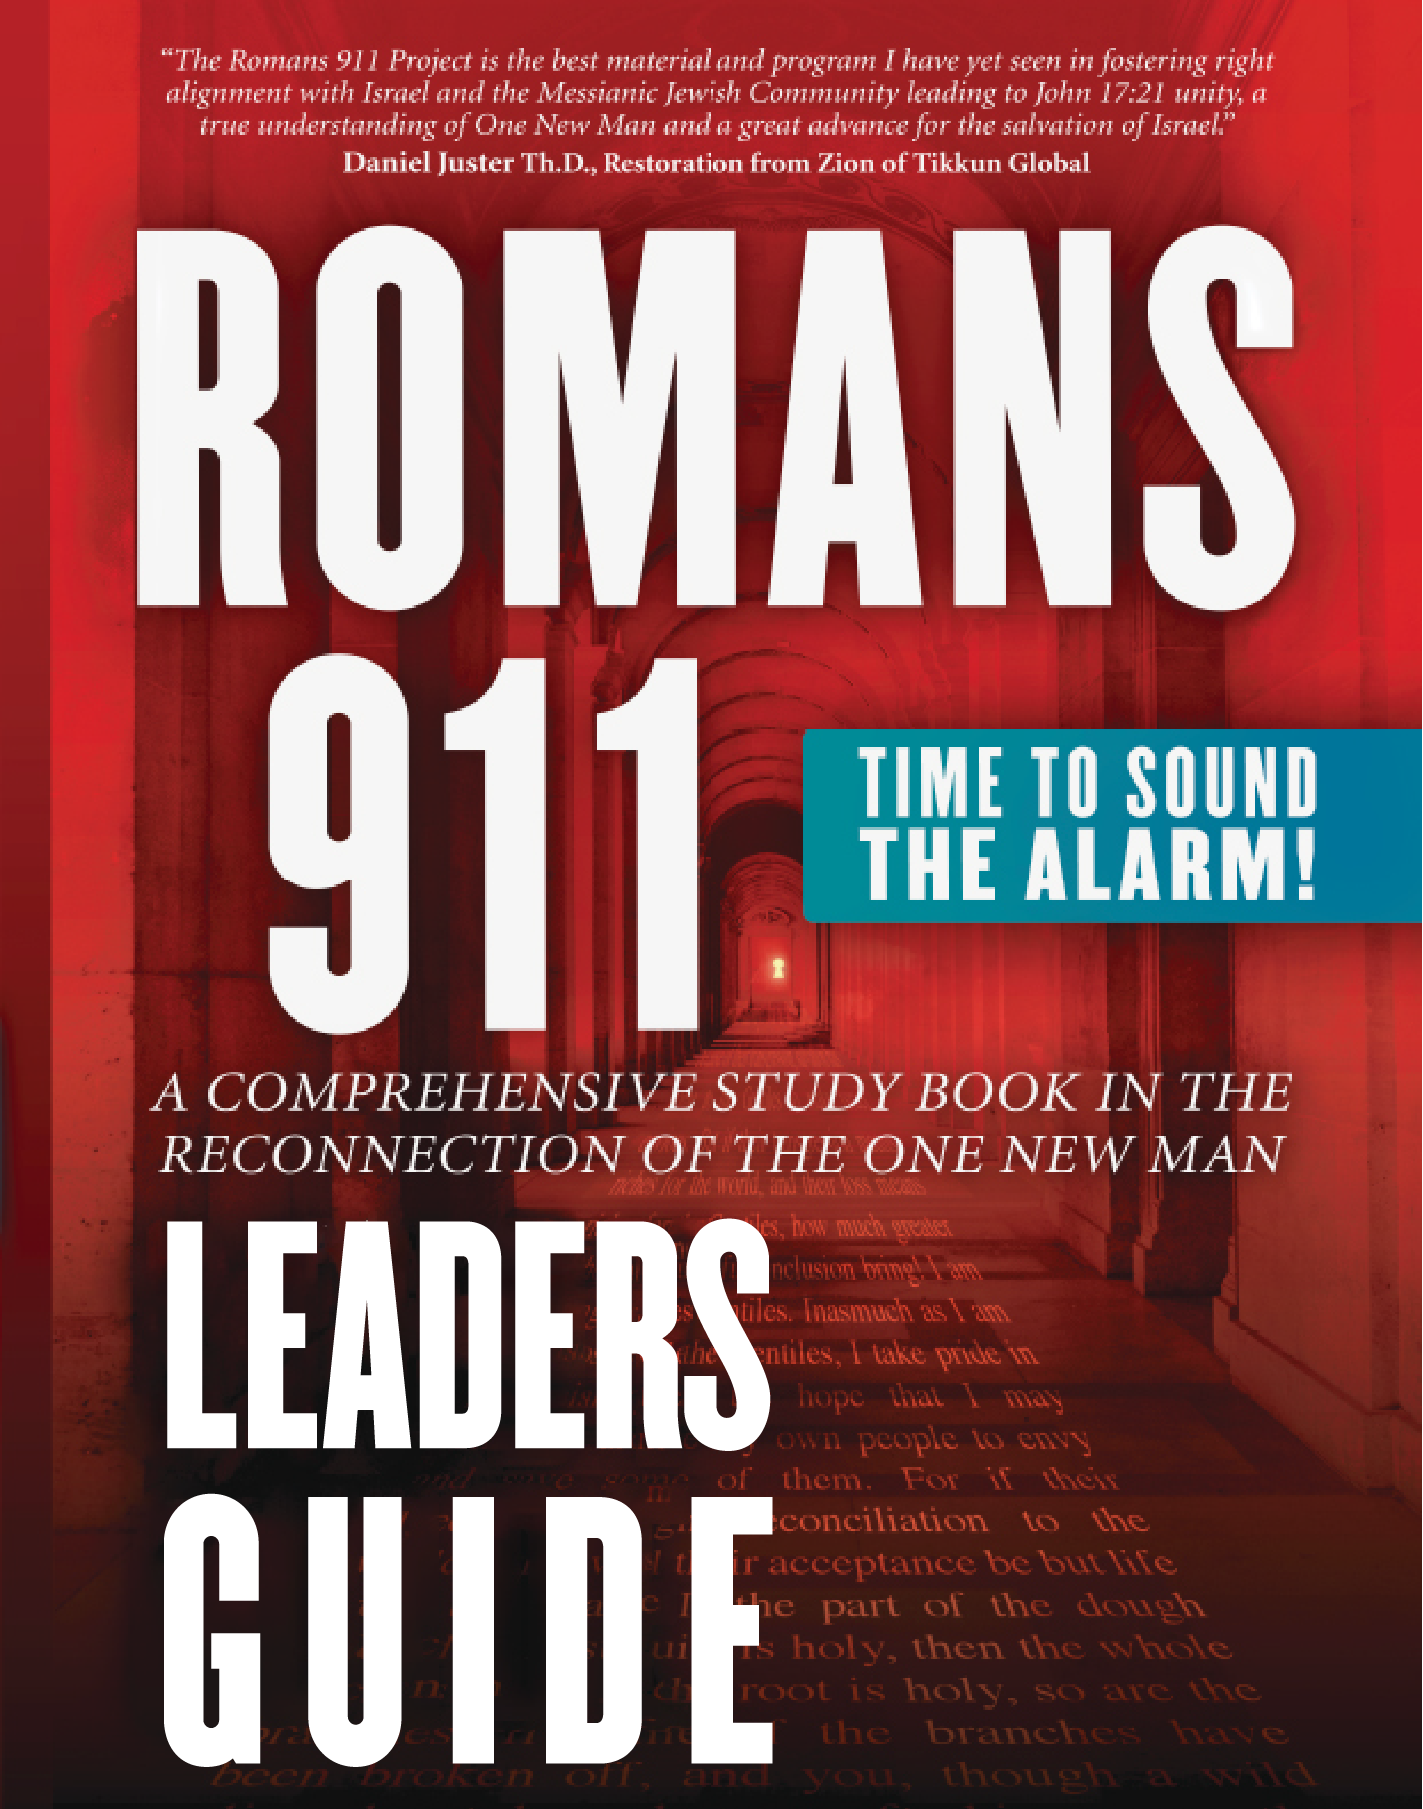 R911_Leaders-Guide_Cover